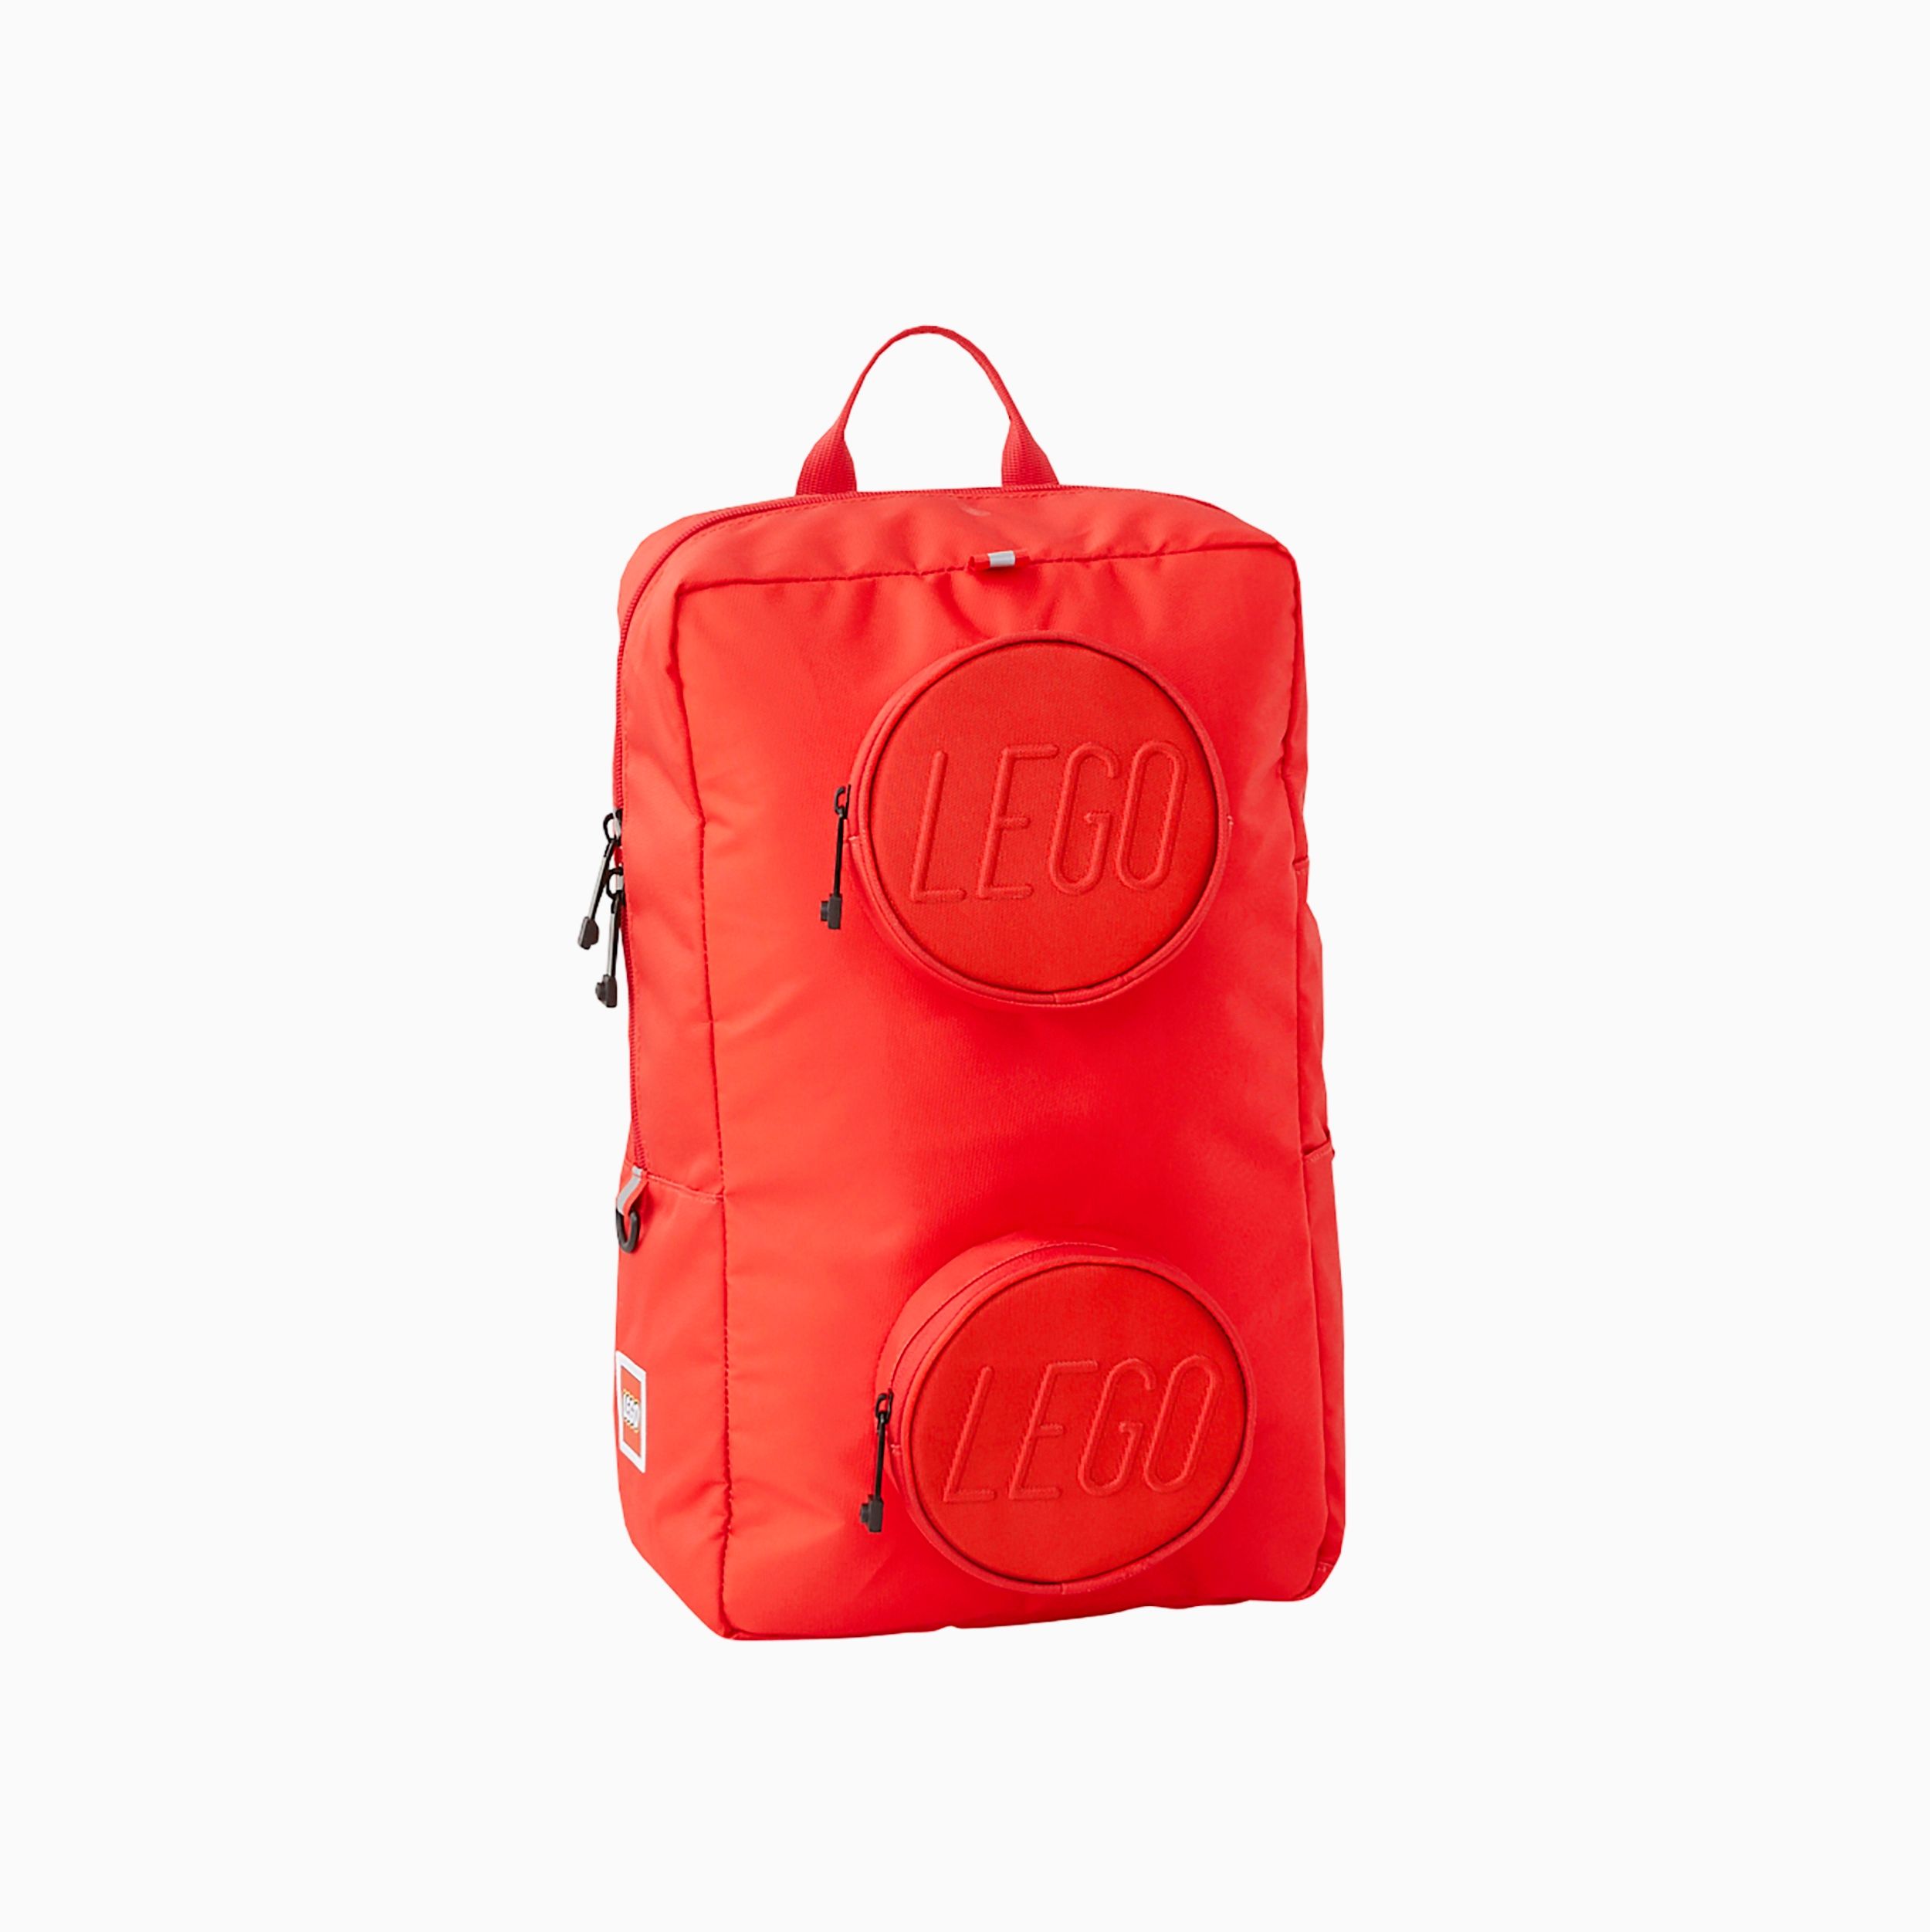 LEGO Gear 5007253 Brick 1x2 Backpack- Br Red